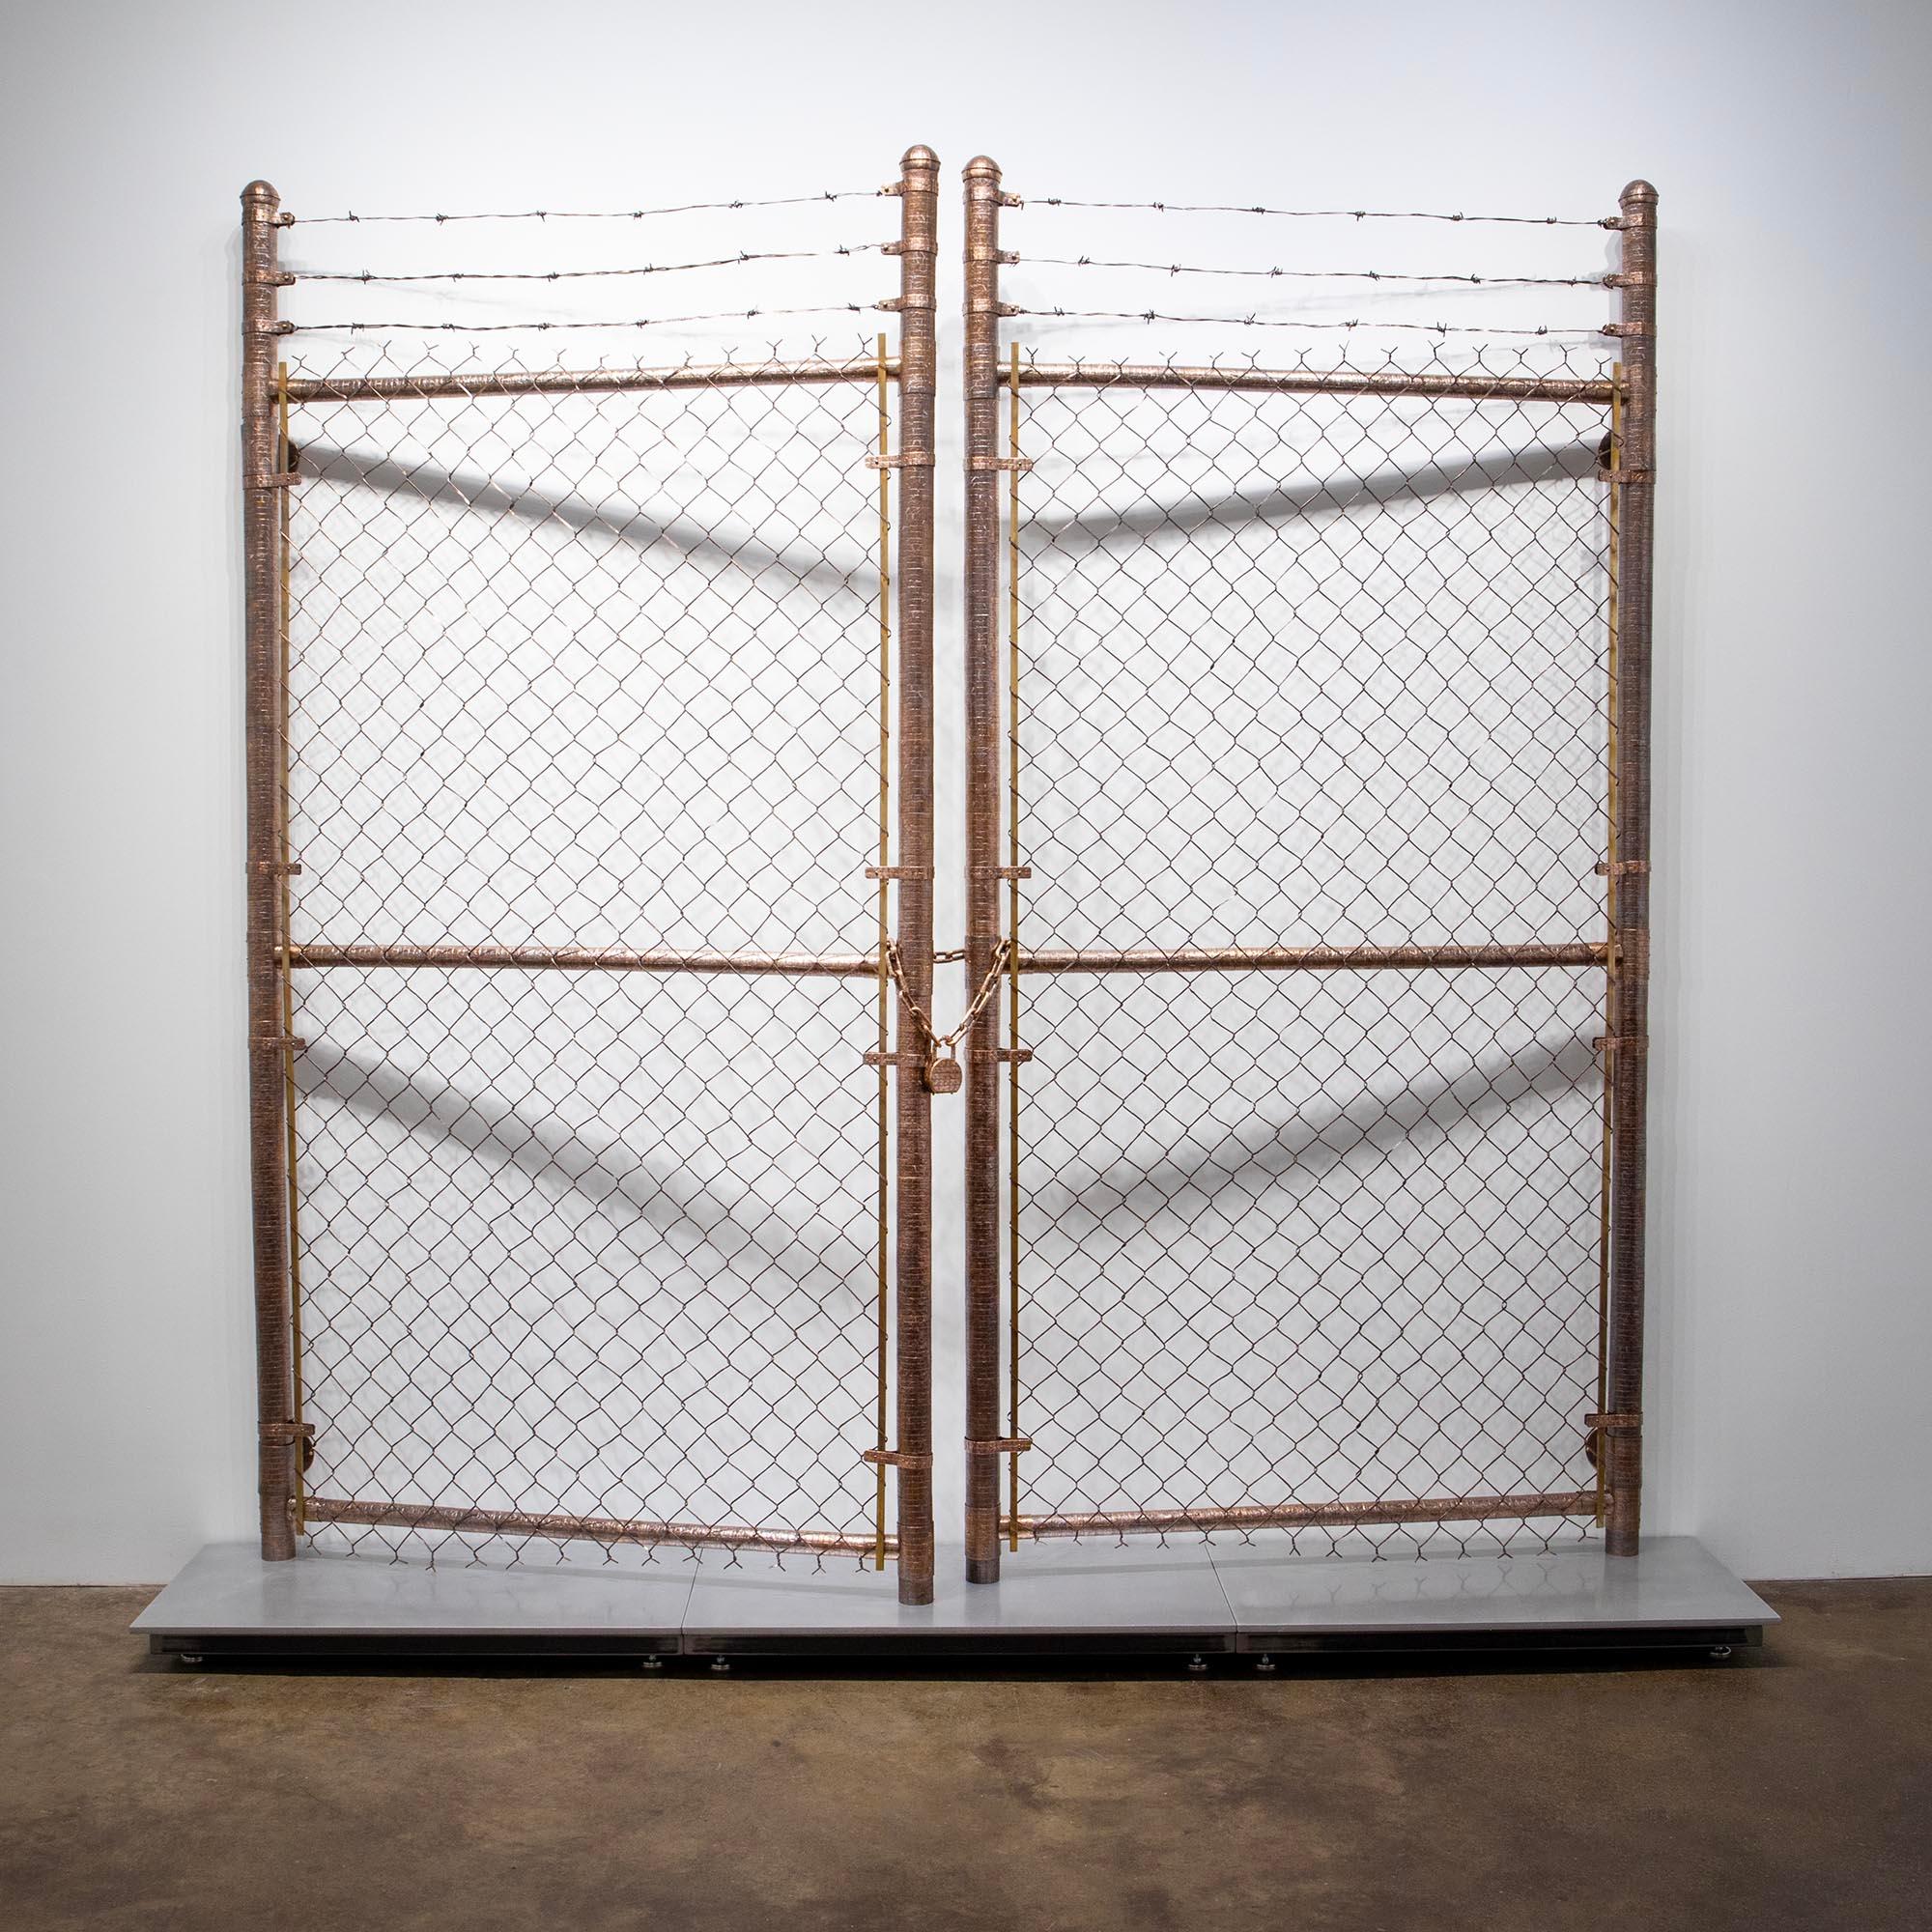 GOD BLESS AMERICA: CHAINLINK - Sculpture by Stacey Lee Webber